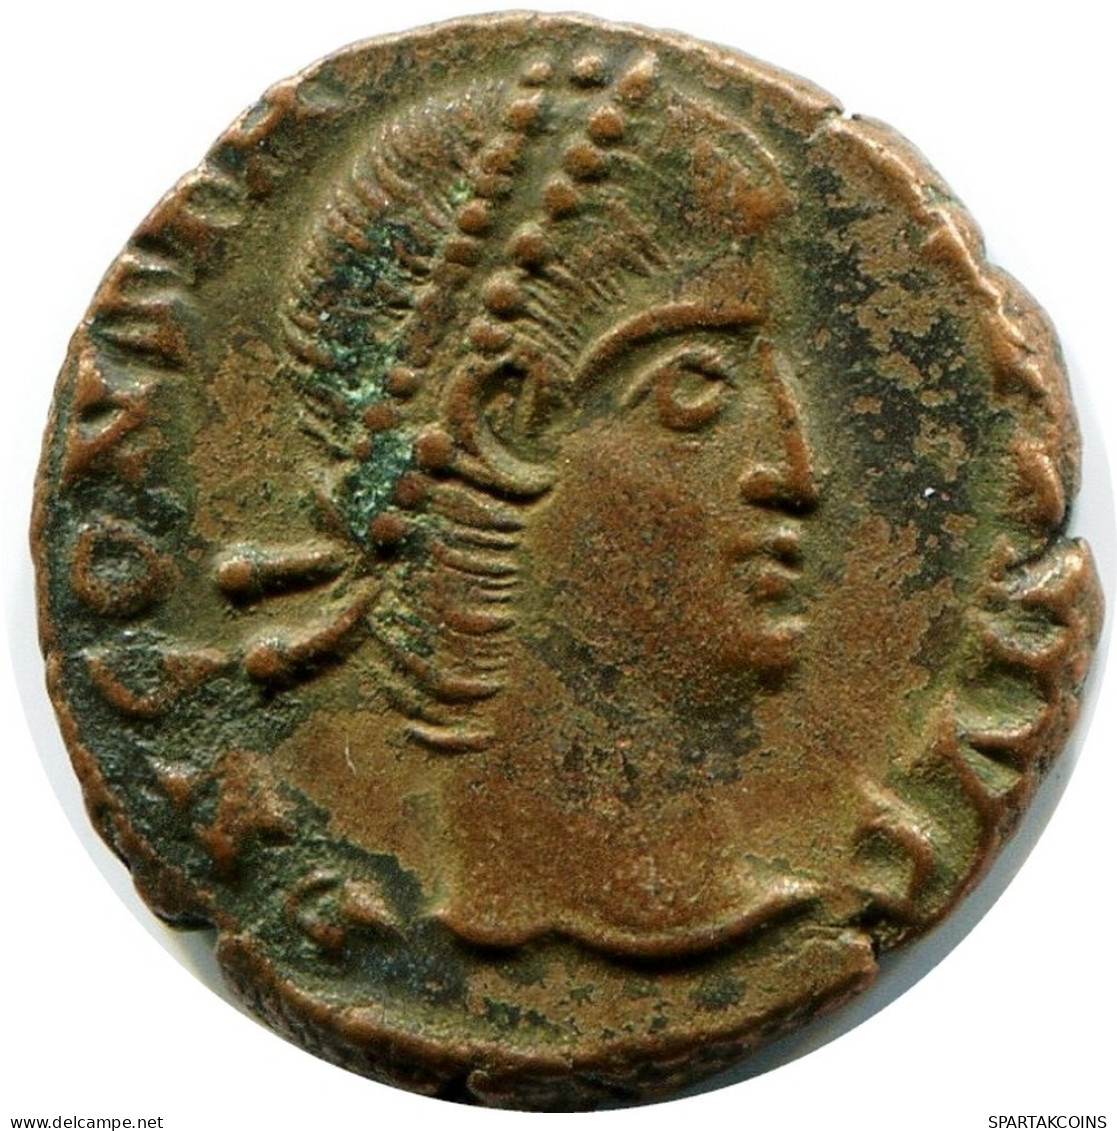 CONSTANS MINTED IN CYZICUS FOUND IN IHNASYAH HOARD EGYPT #ANC11590.14.U.A - The Christian Empire (307 AD Tot 363 AD)